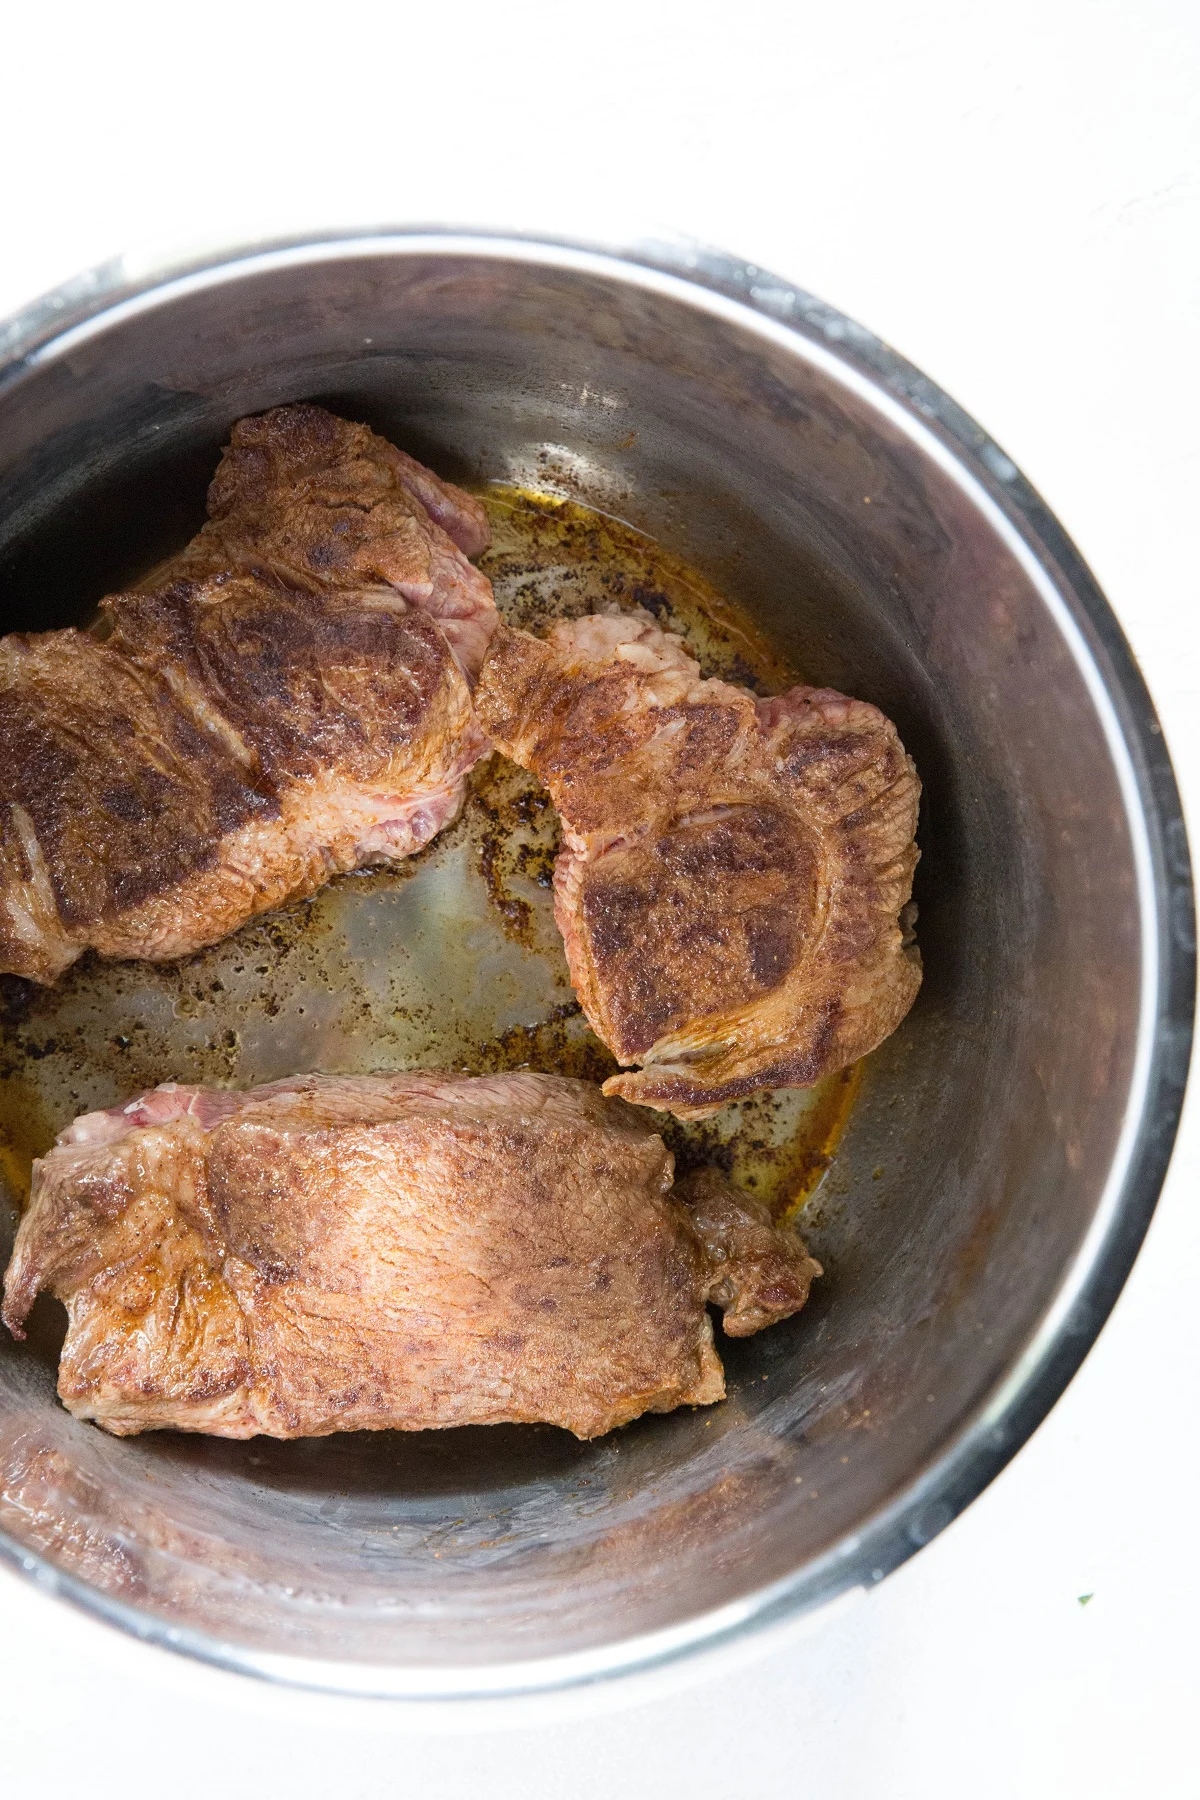 How to make shredded beef in the instant pot